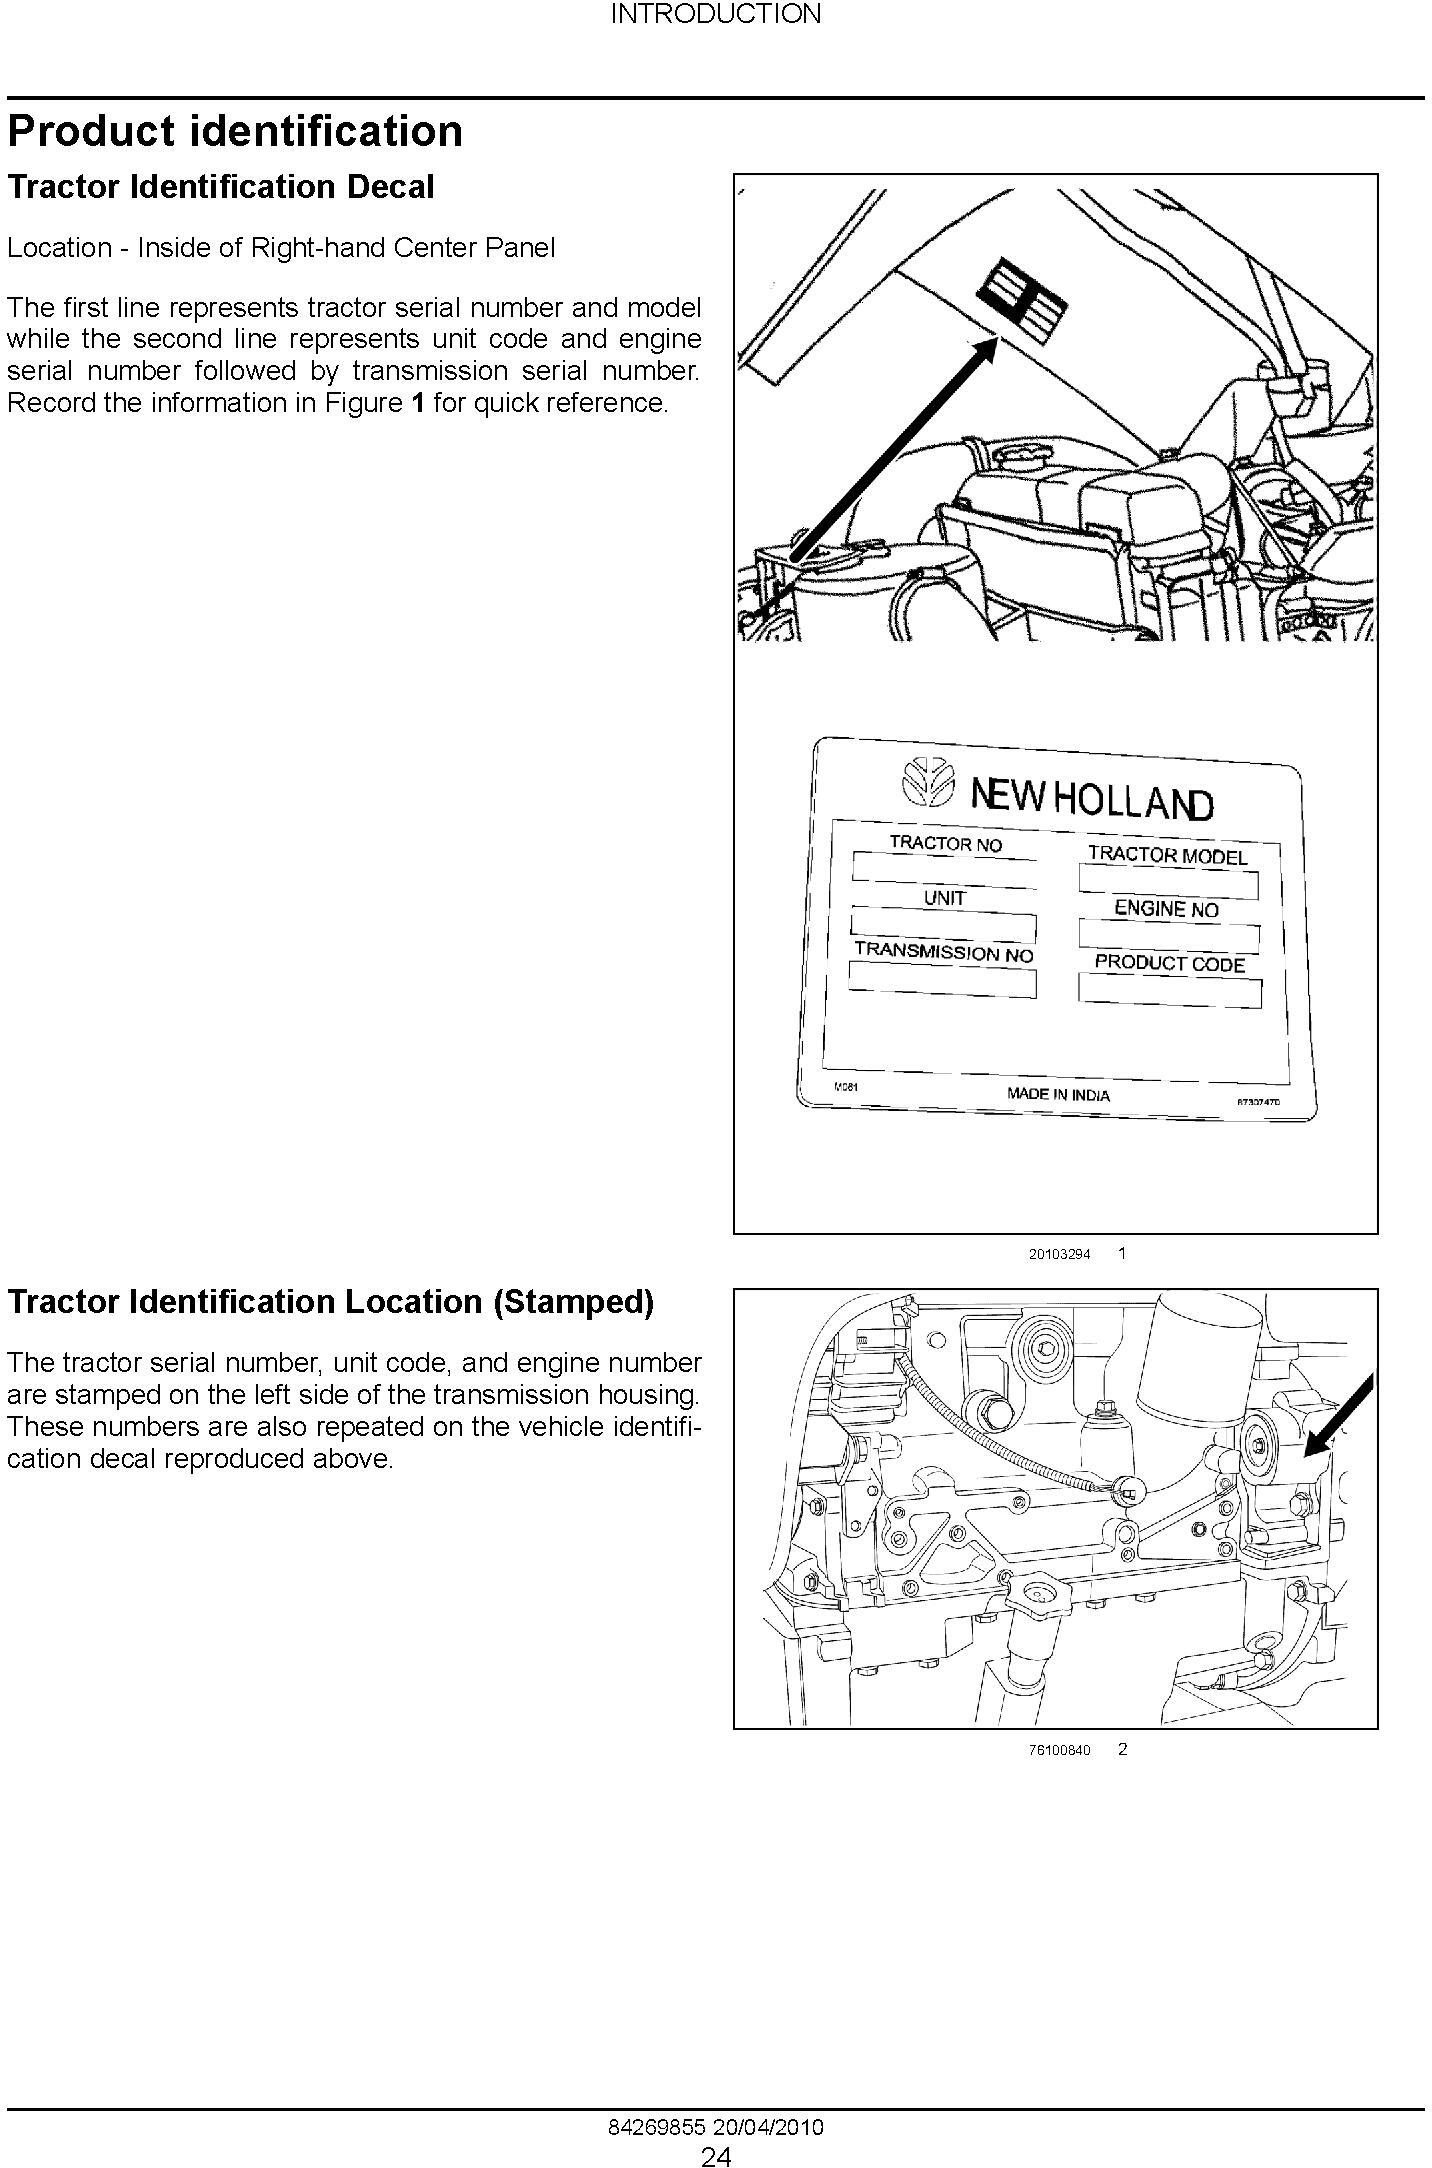 New Holland Workmaster 75, Workmaster 65 Tractor Complete Service Manual - 1